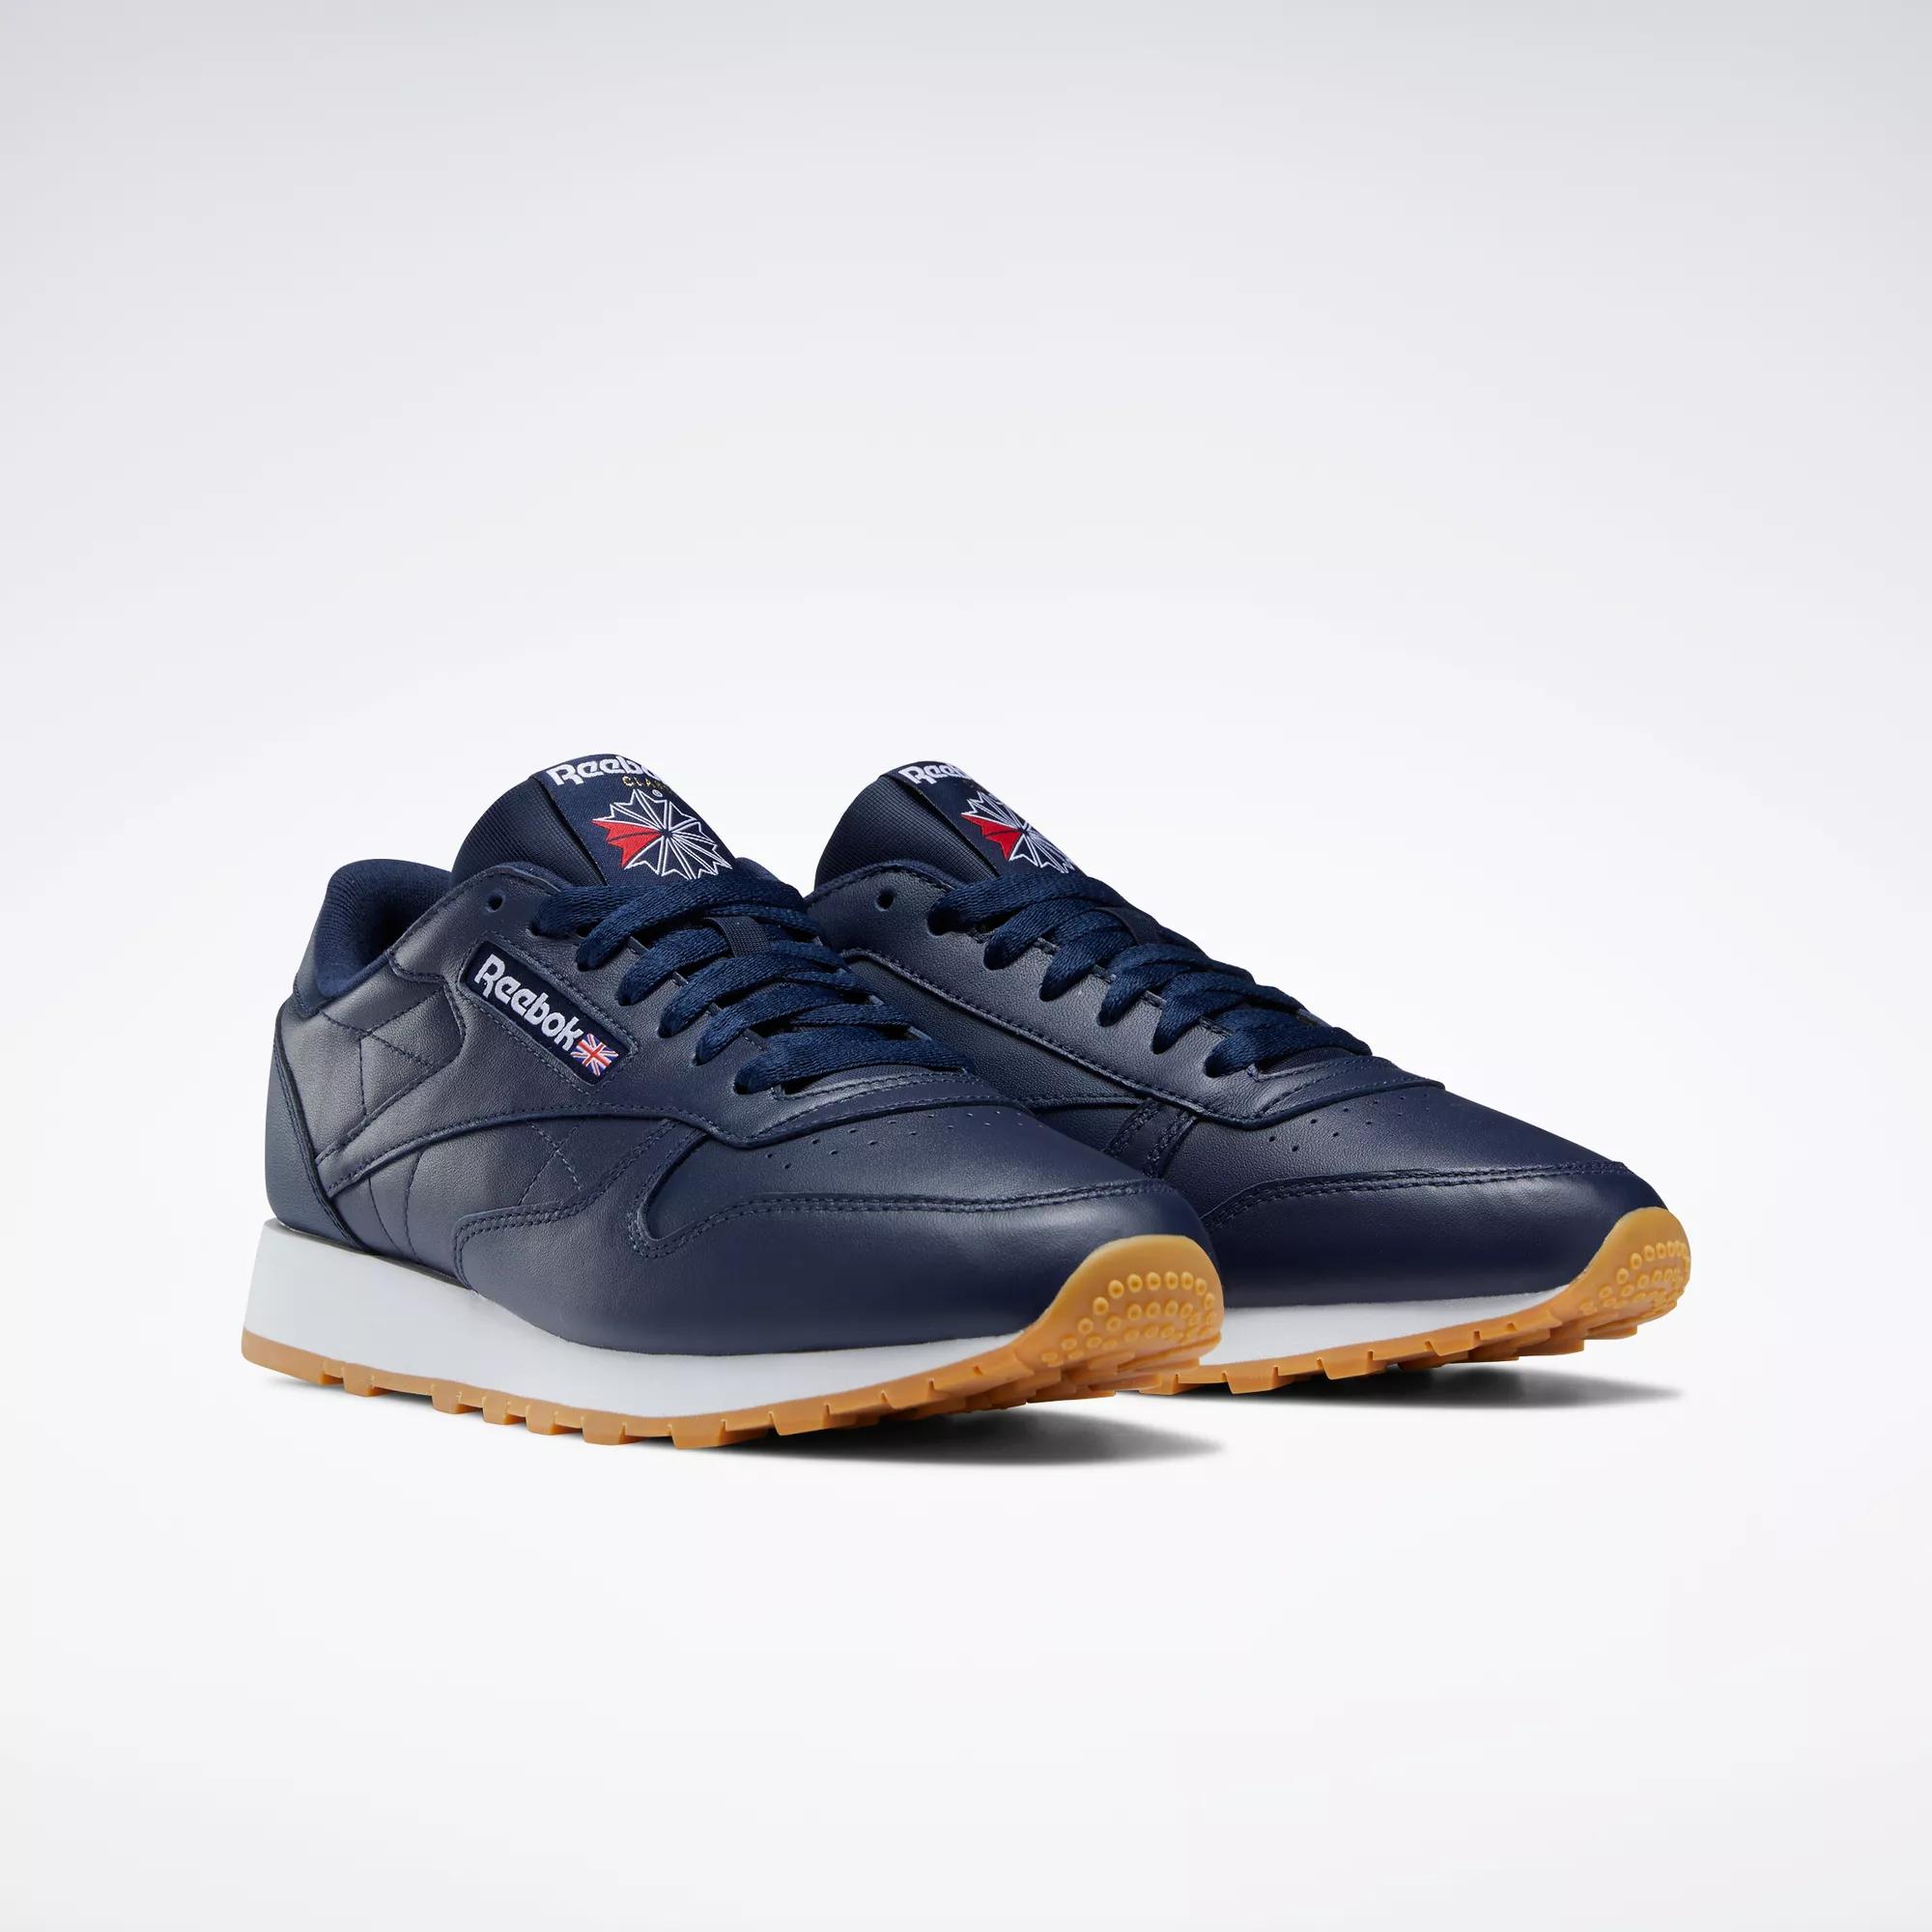 Classic Leather Shoes - Vector Navy / Ftwr White / Reebok Rubber Gum-03